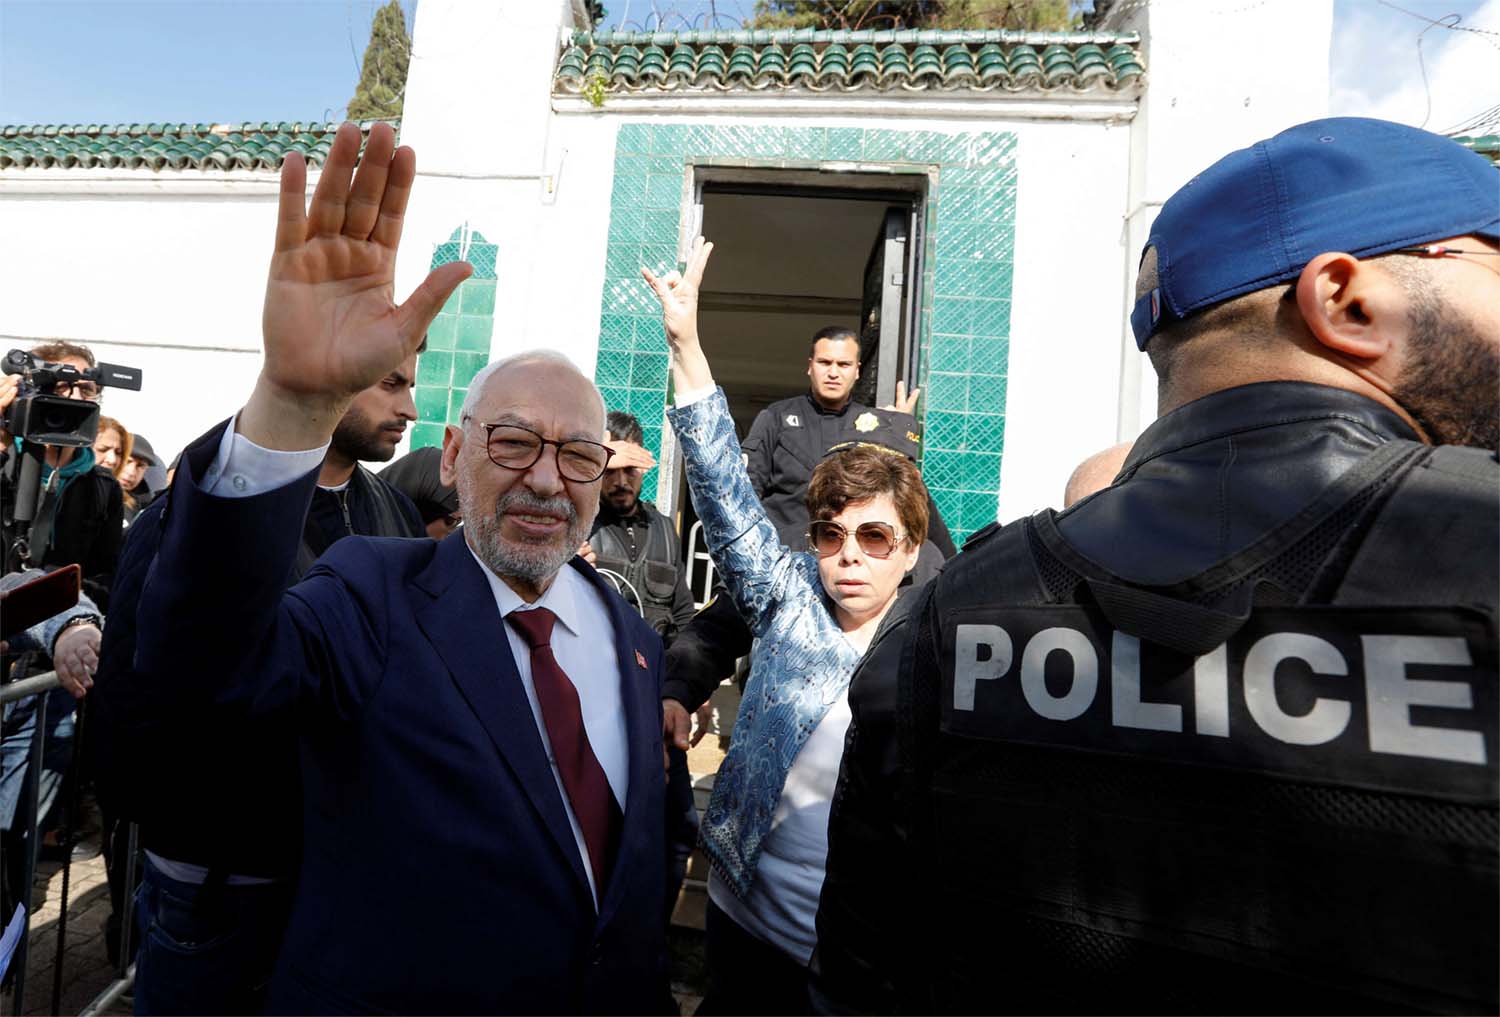 Ghannouchi was jailed last year on charges of incitement against police and plotting against state security